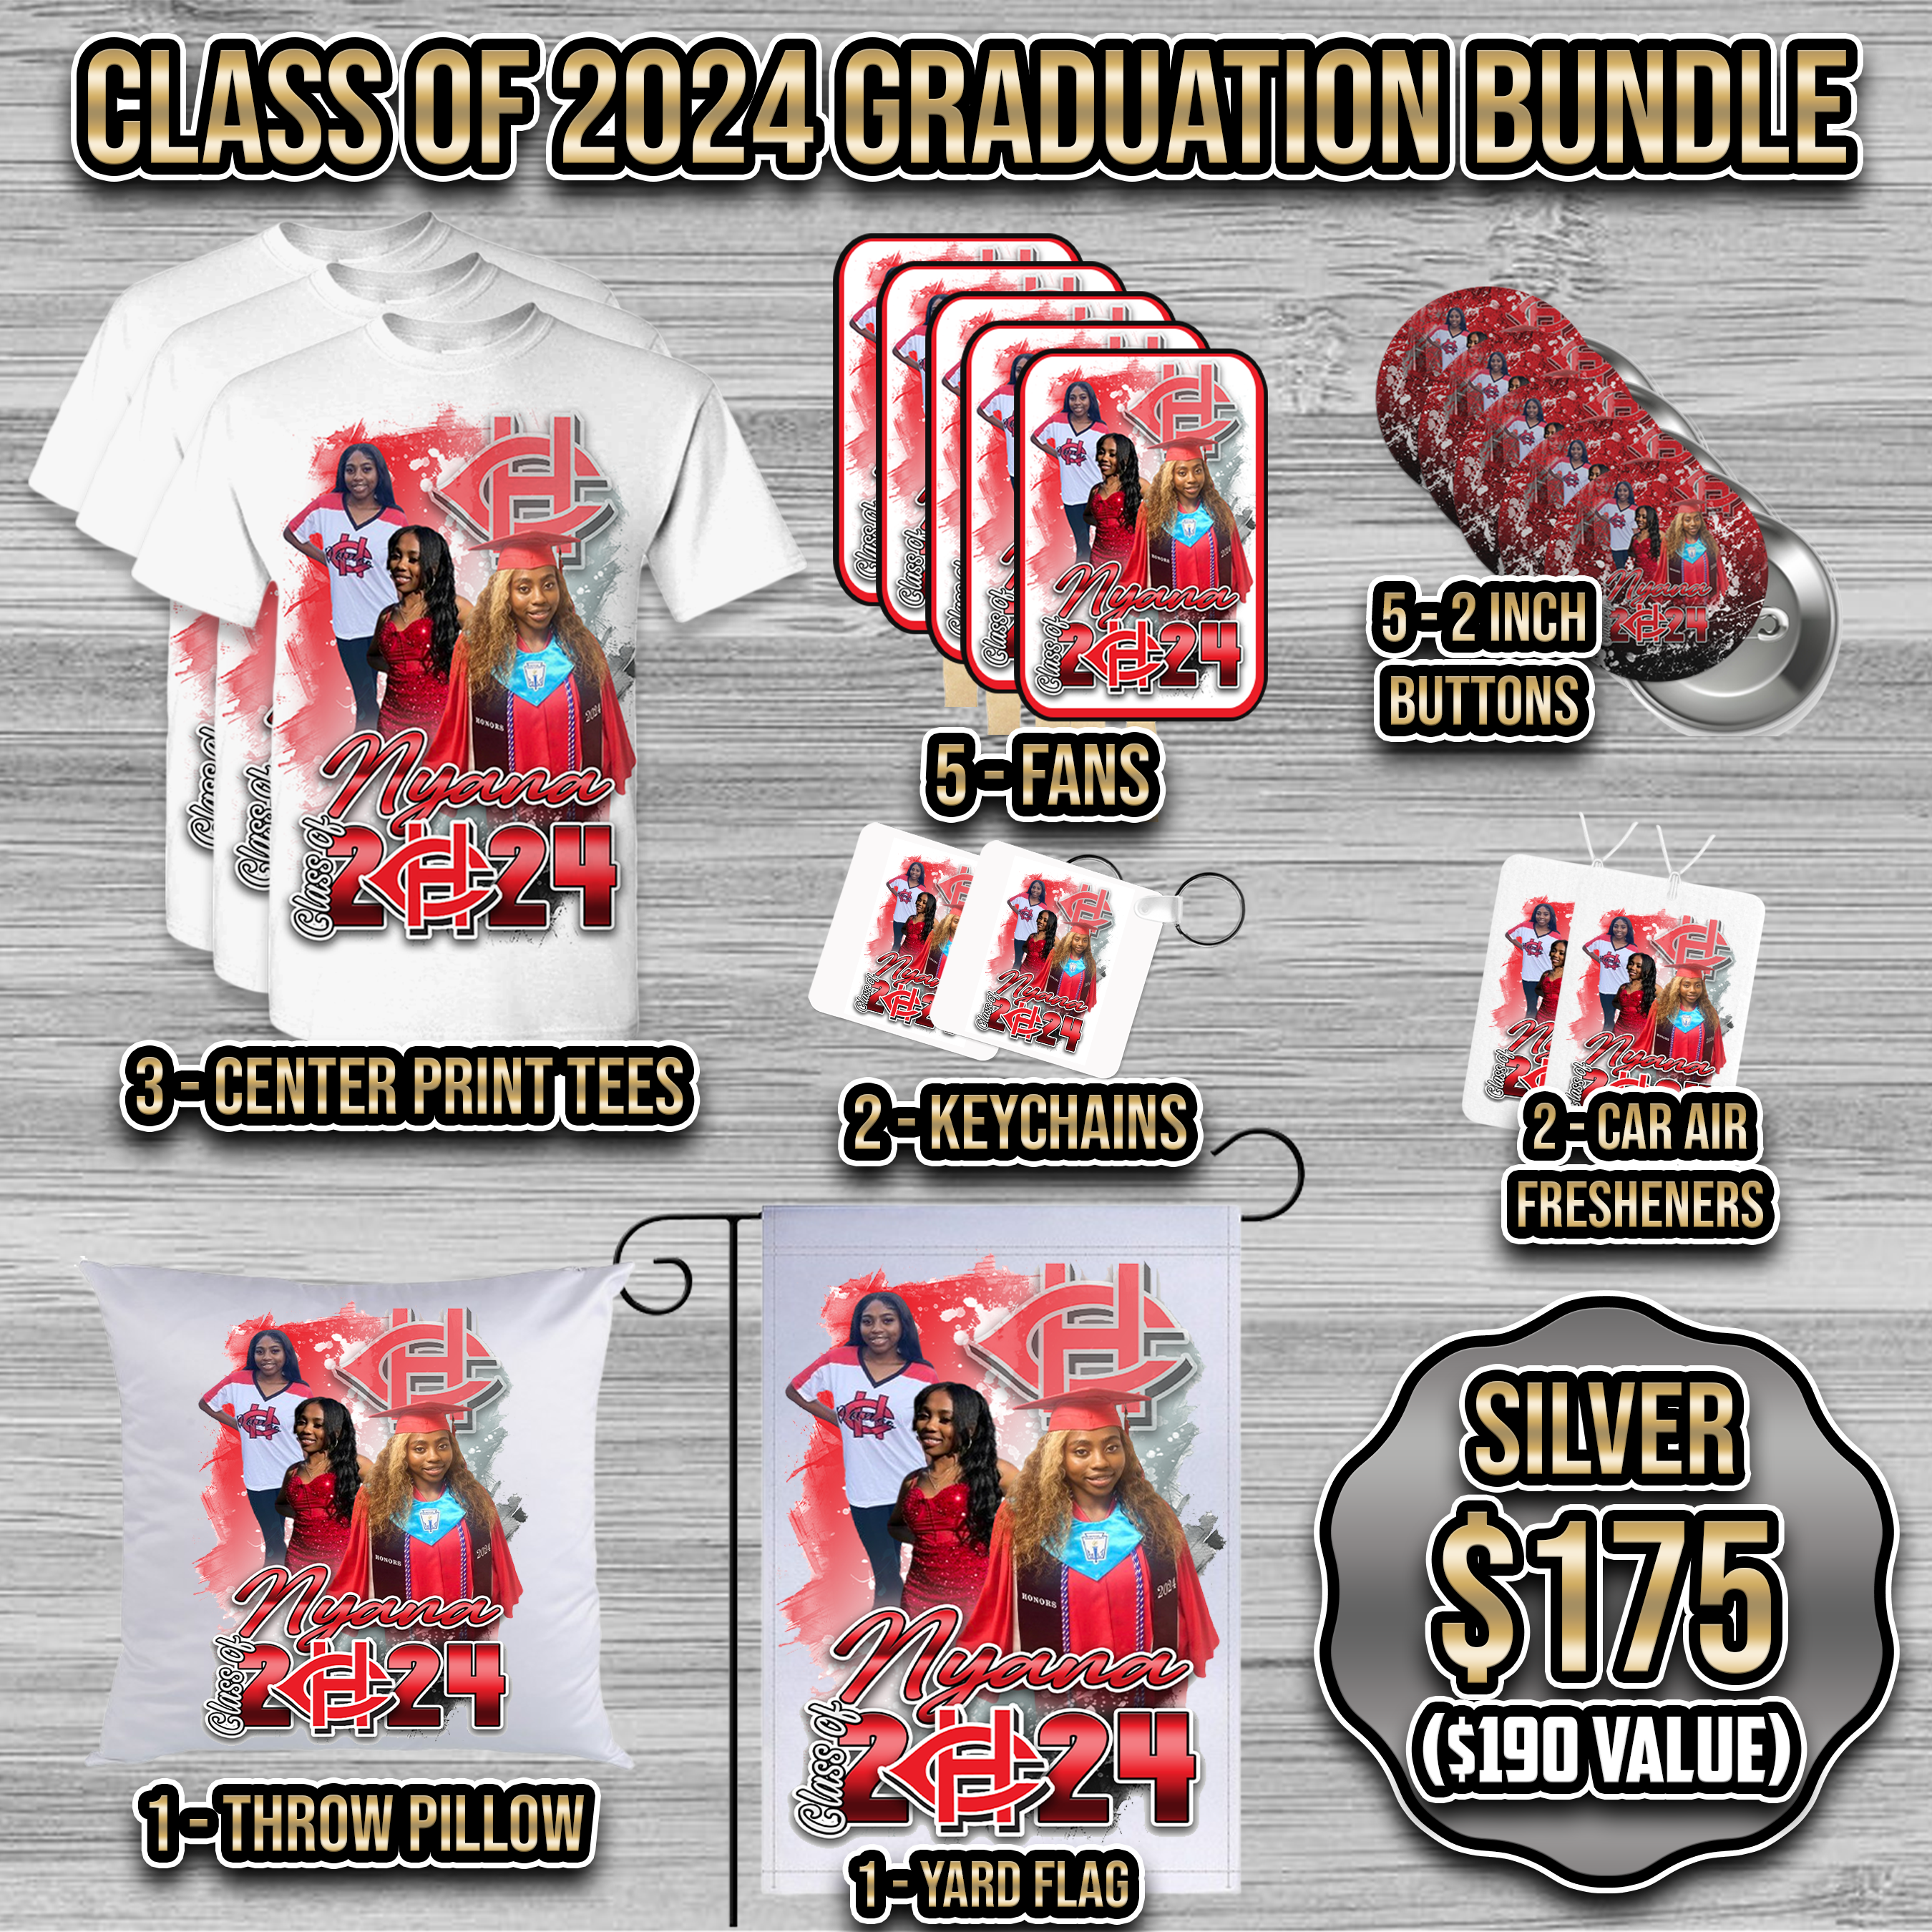 Silver Graduation Package